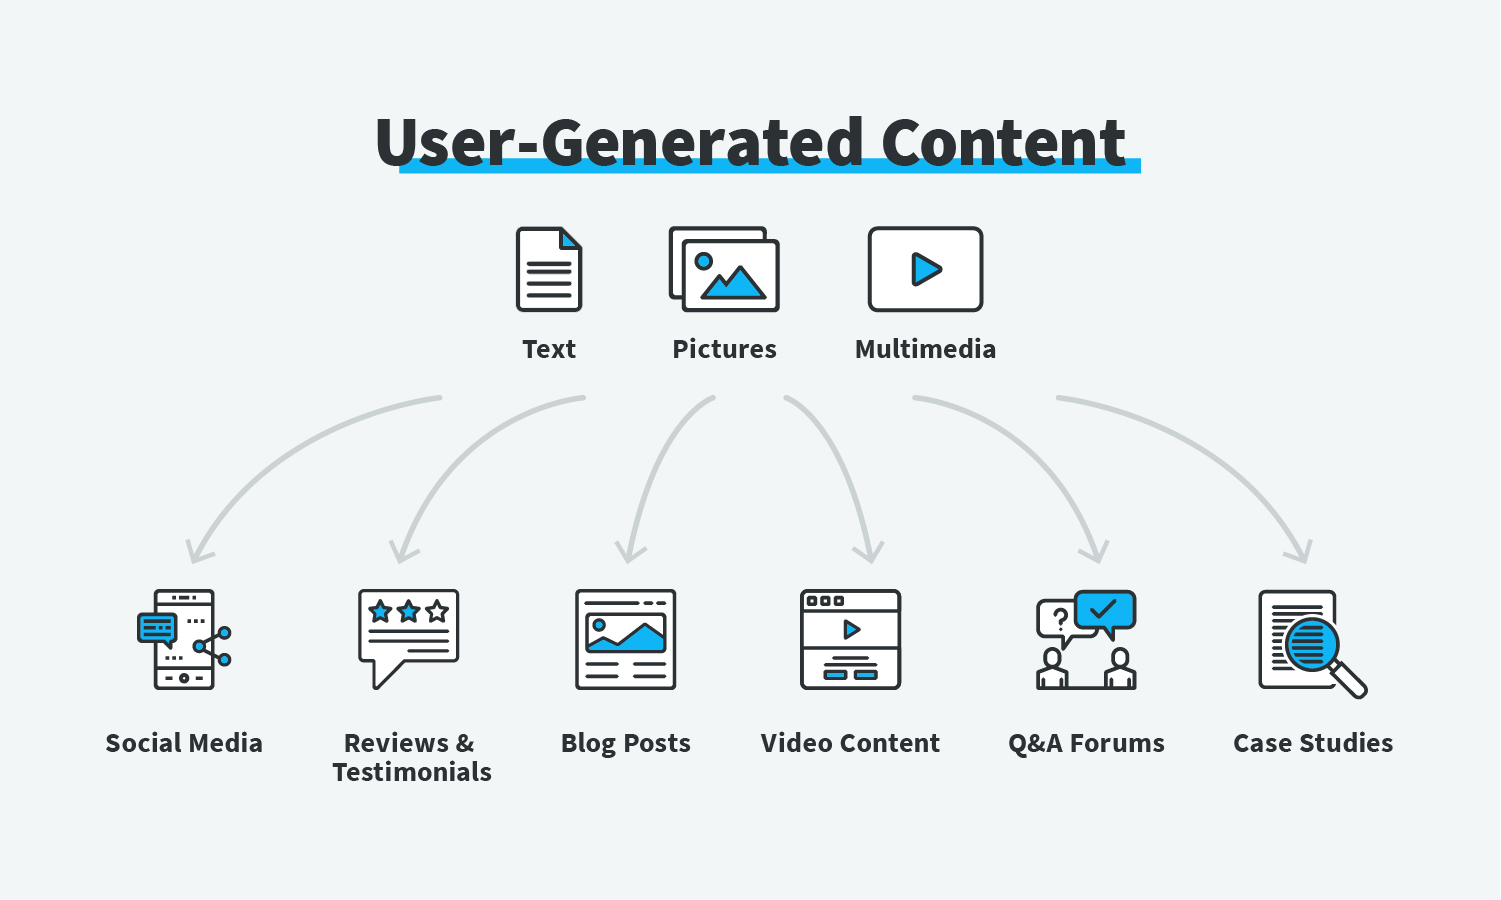 Types of user-generated content